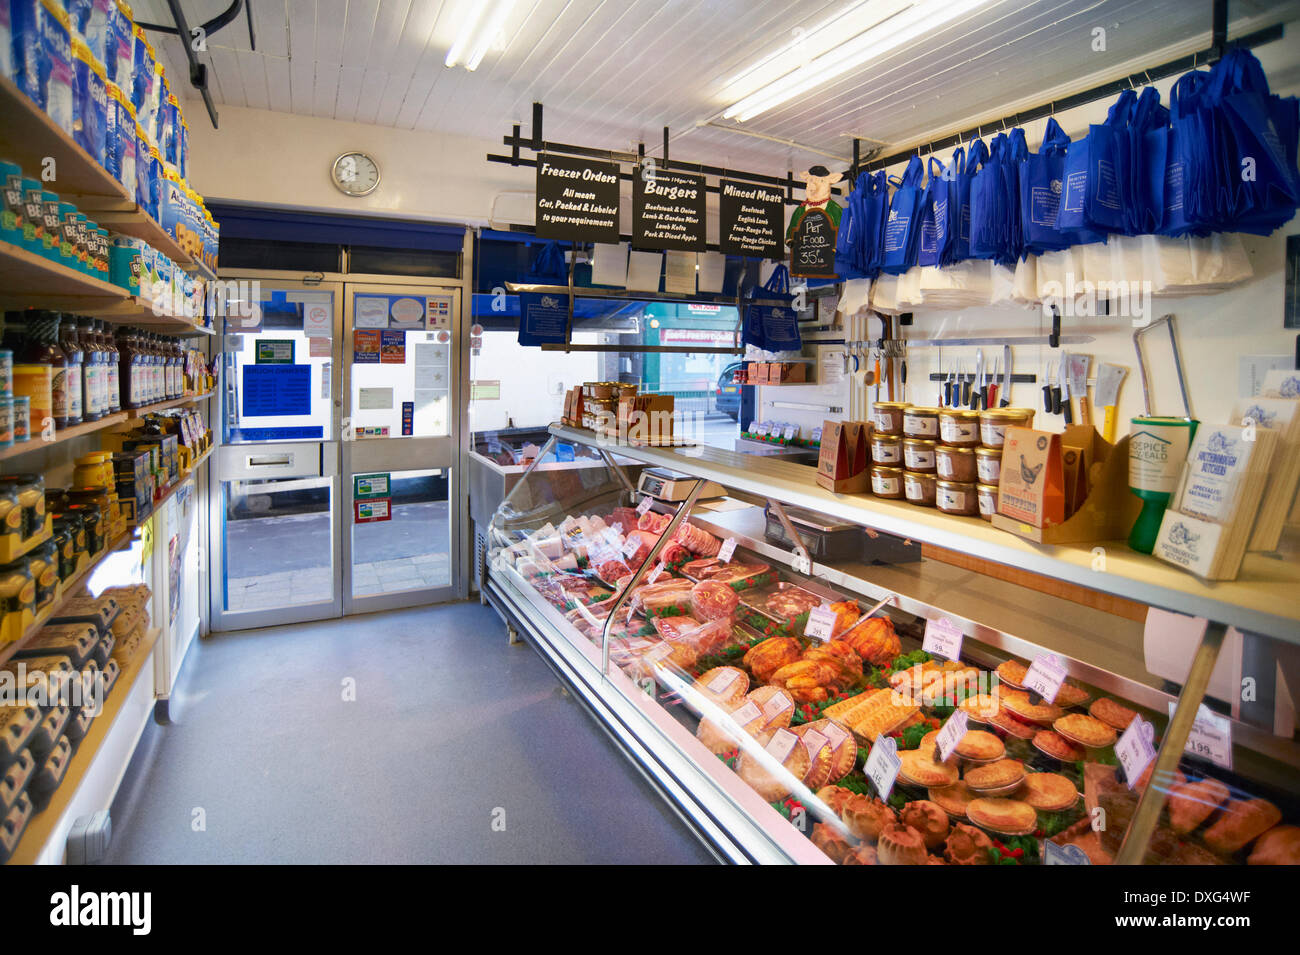 Inside Butcher's Shop With Refrigerated Display Stock Photo